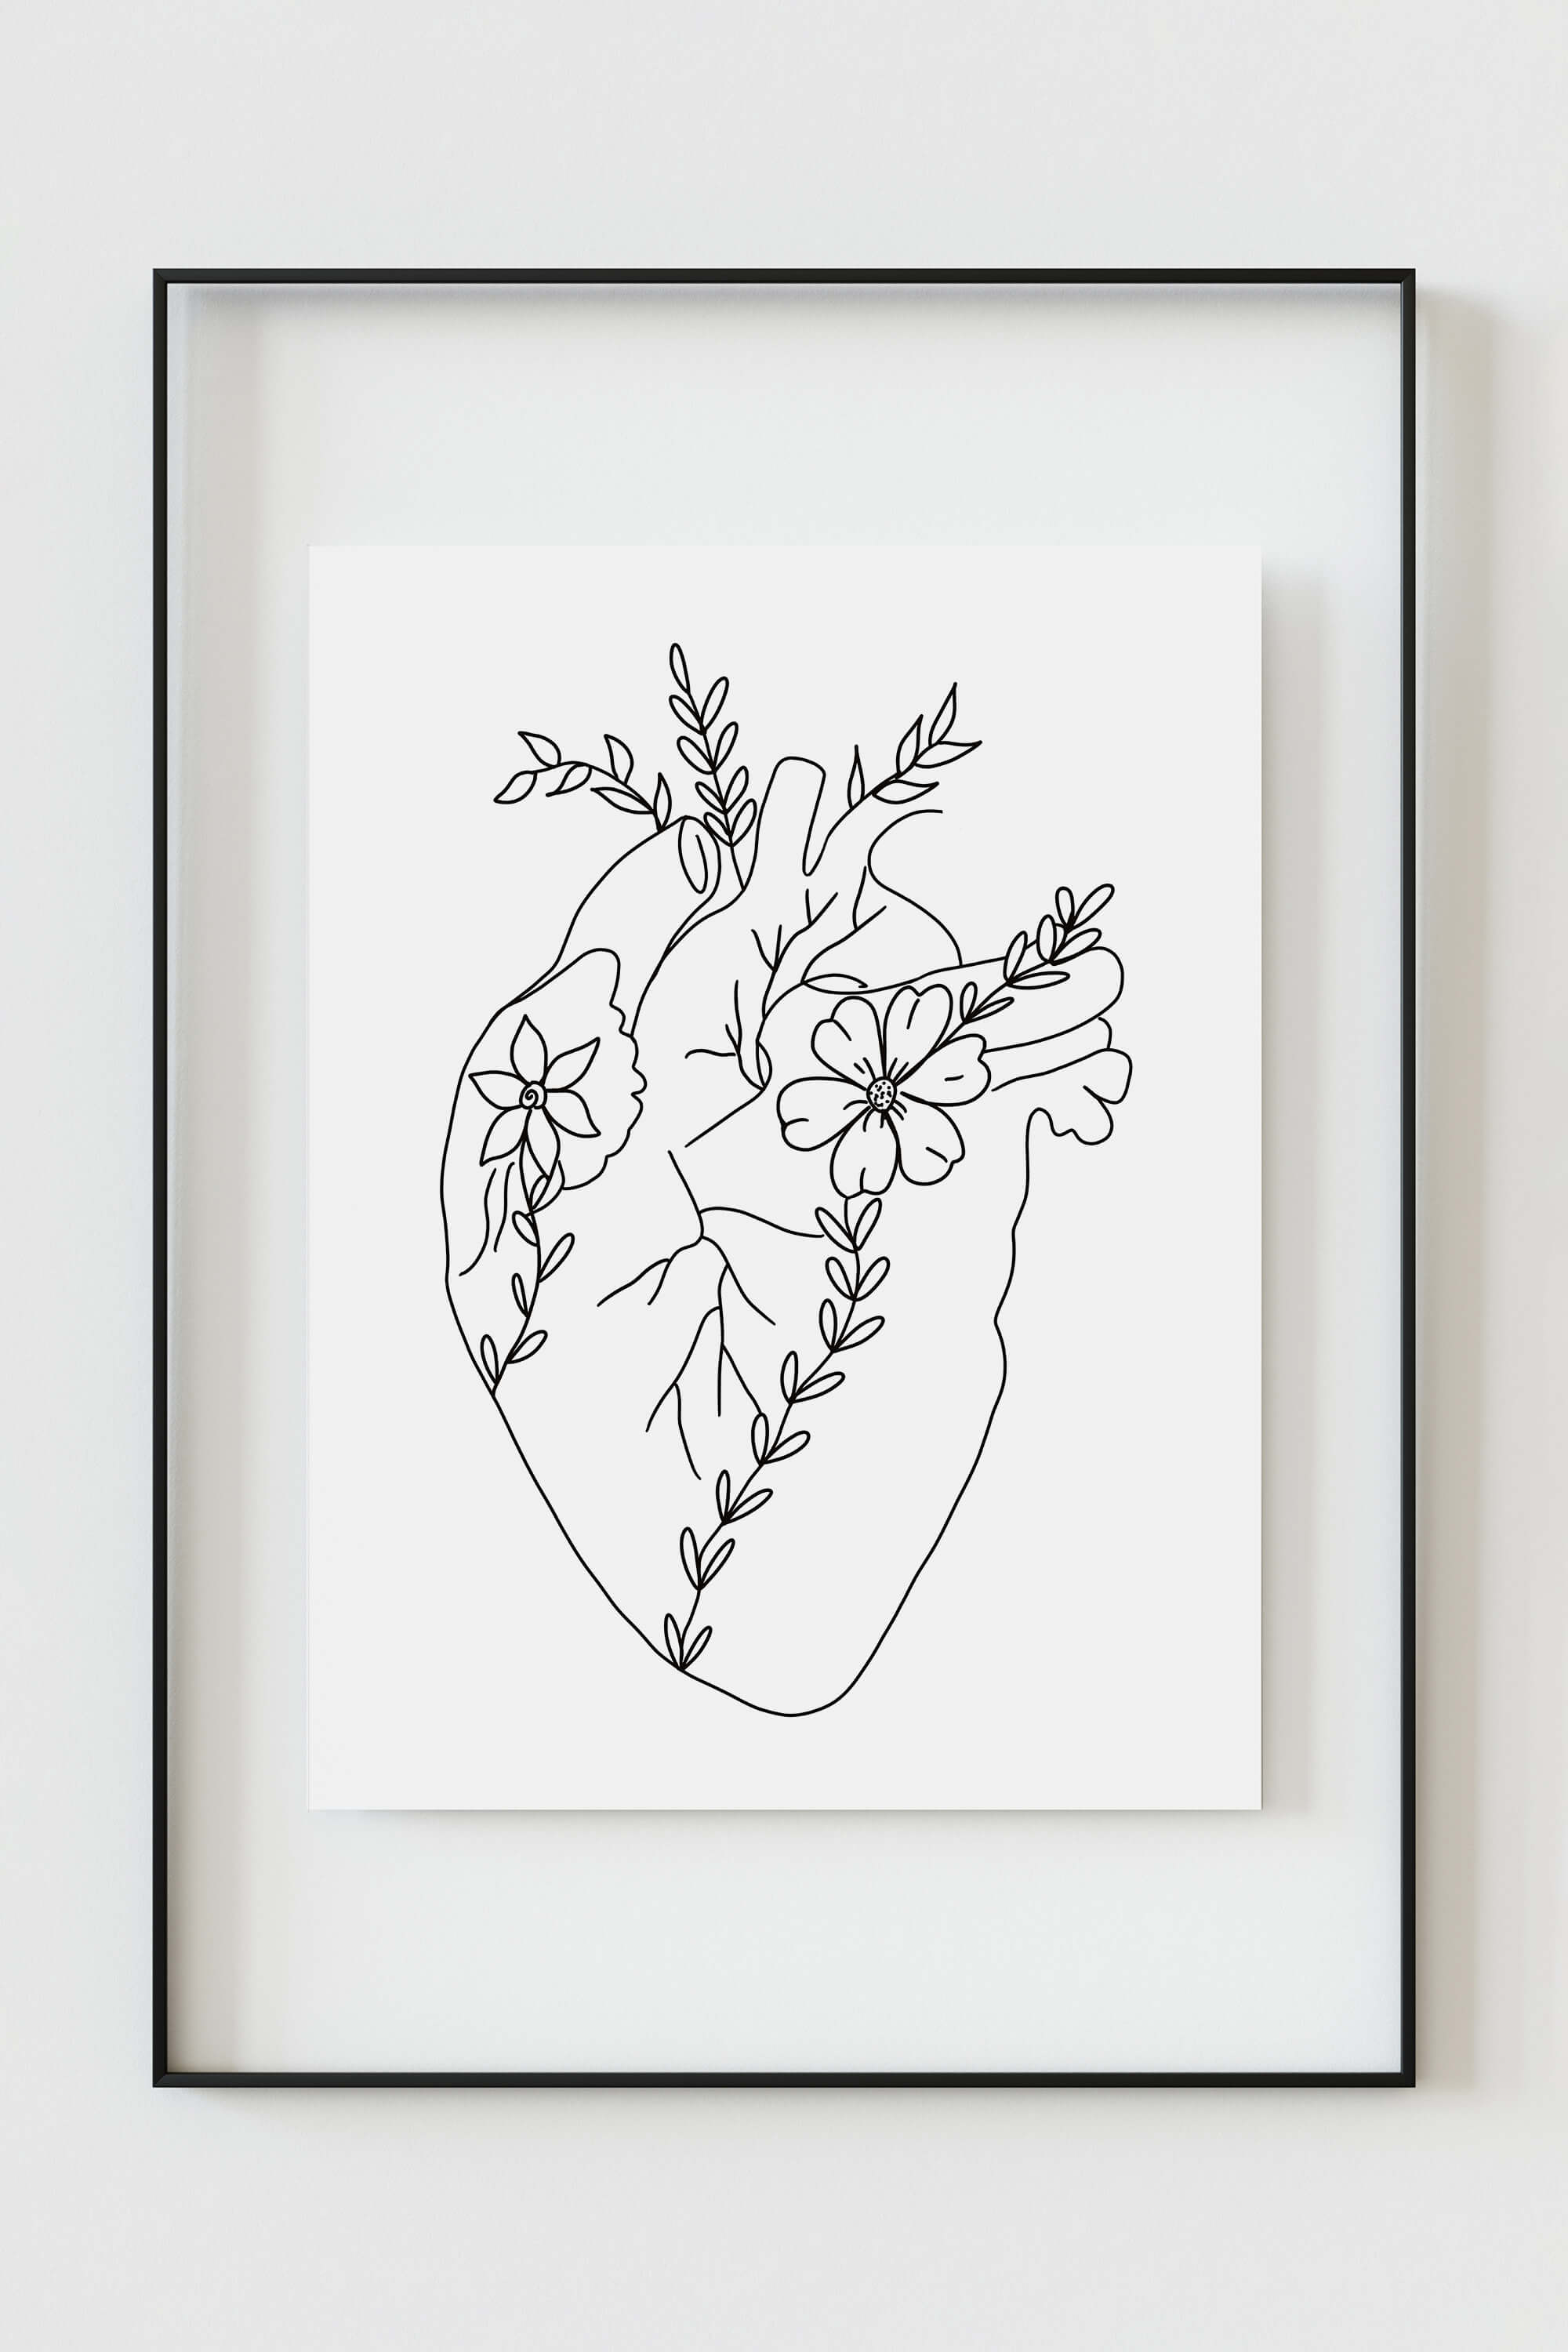 Love line art anatomy poster - Delicate lines intertwine to form a heart, symbolizing the intricate connection between love and anatomy.